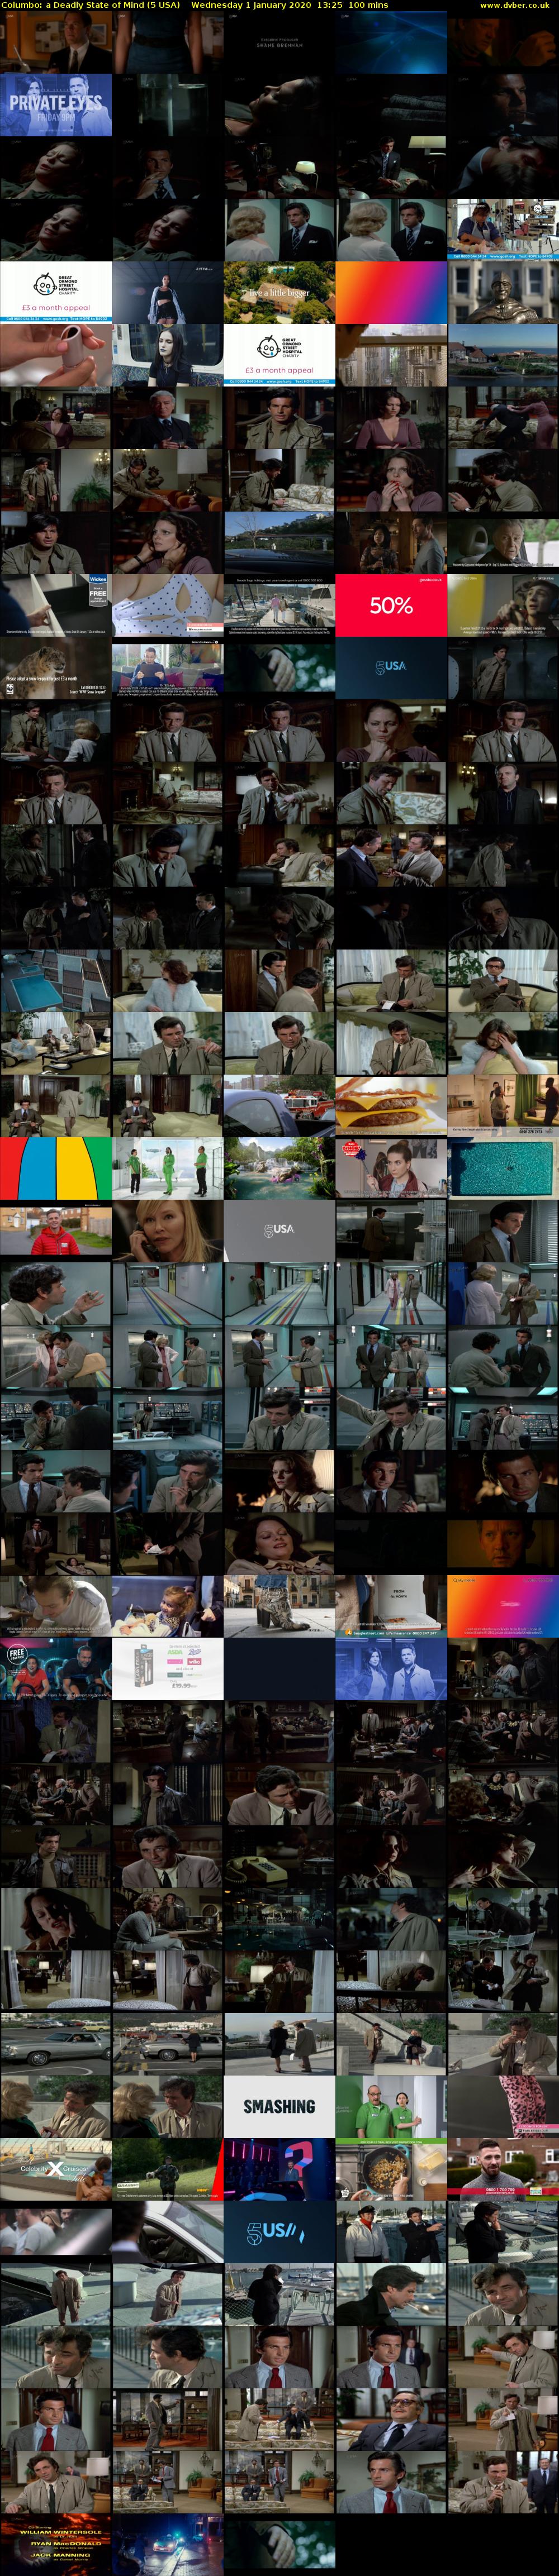 Columbo: A Deadly State of Mind (5 USA) Wednesday 1 January 2020 13:25 - 15:05